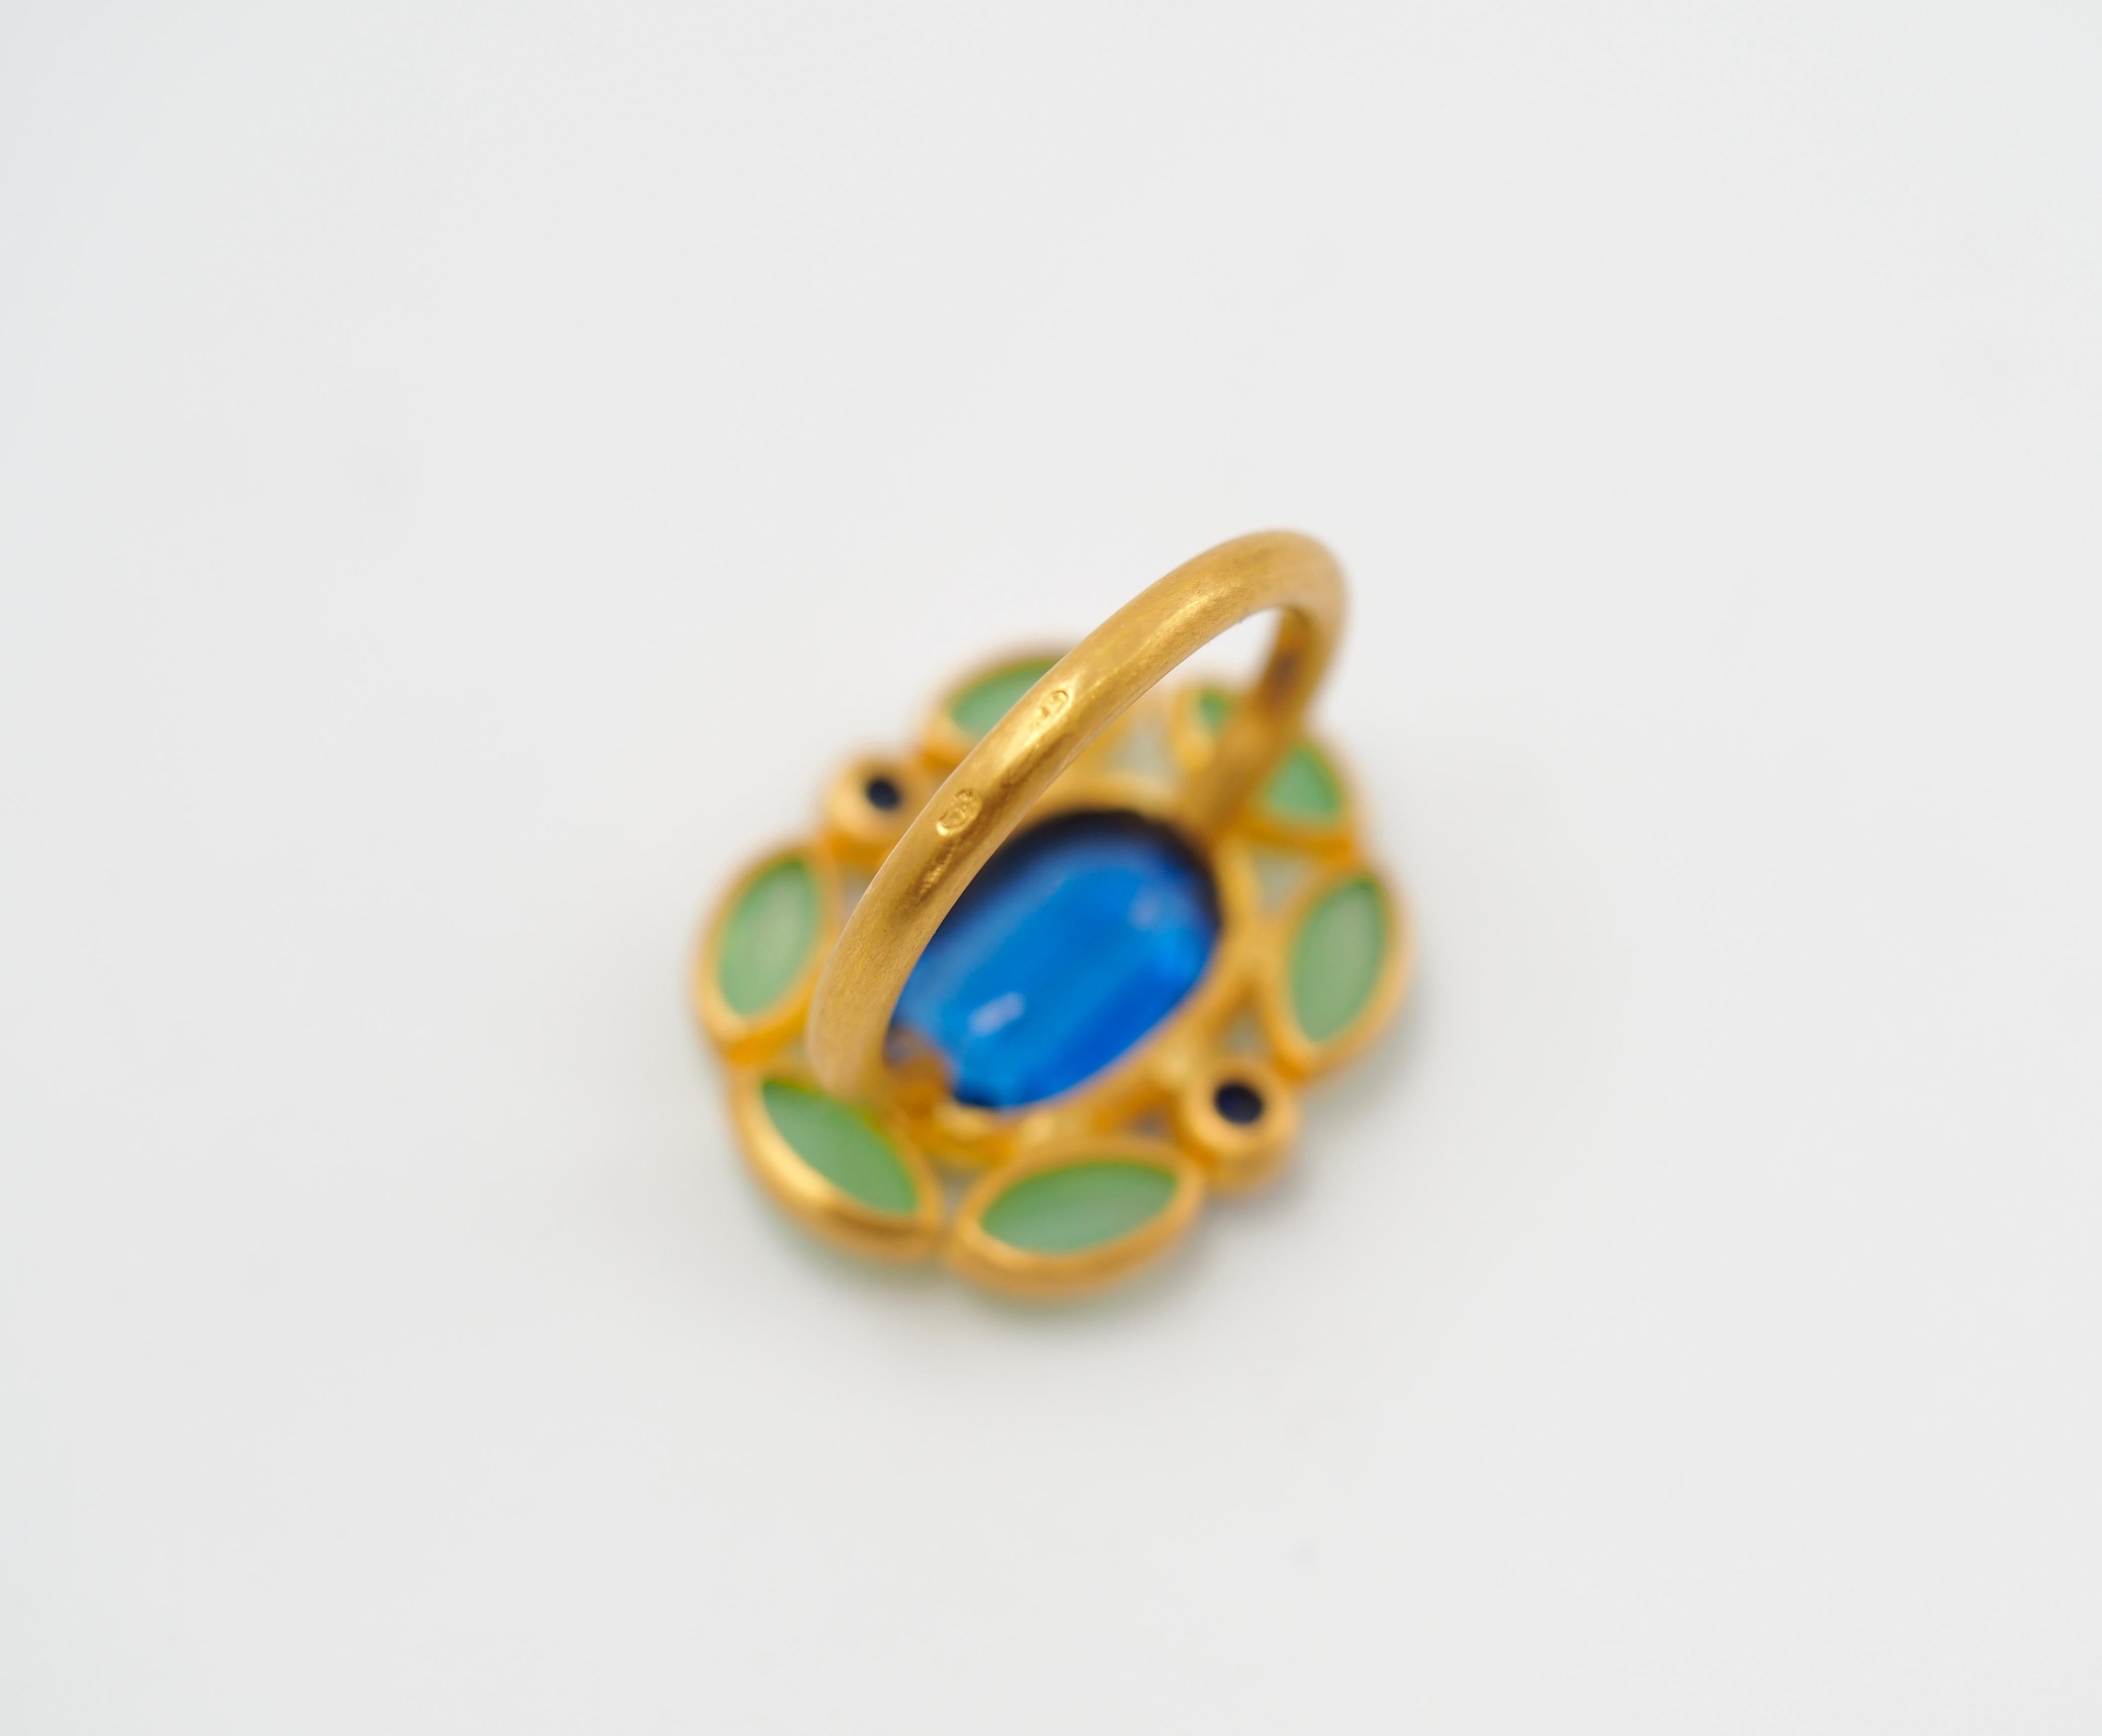 Scrives Kyanite Chrysoprase Sapphire Cabochon 22 Kt Gold Cocktail Handmade Ring 2